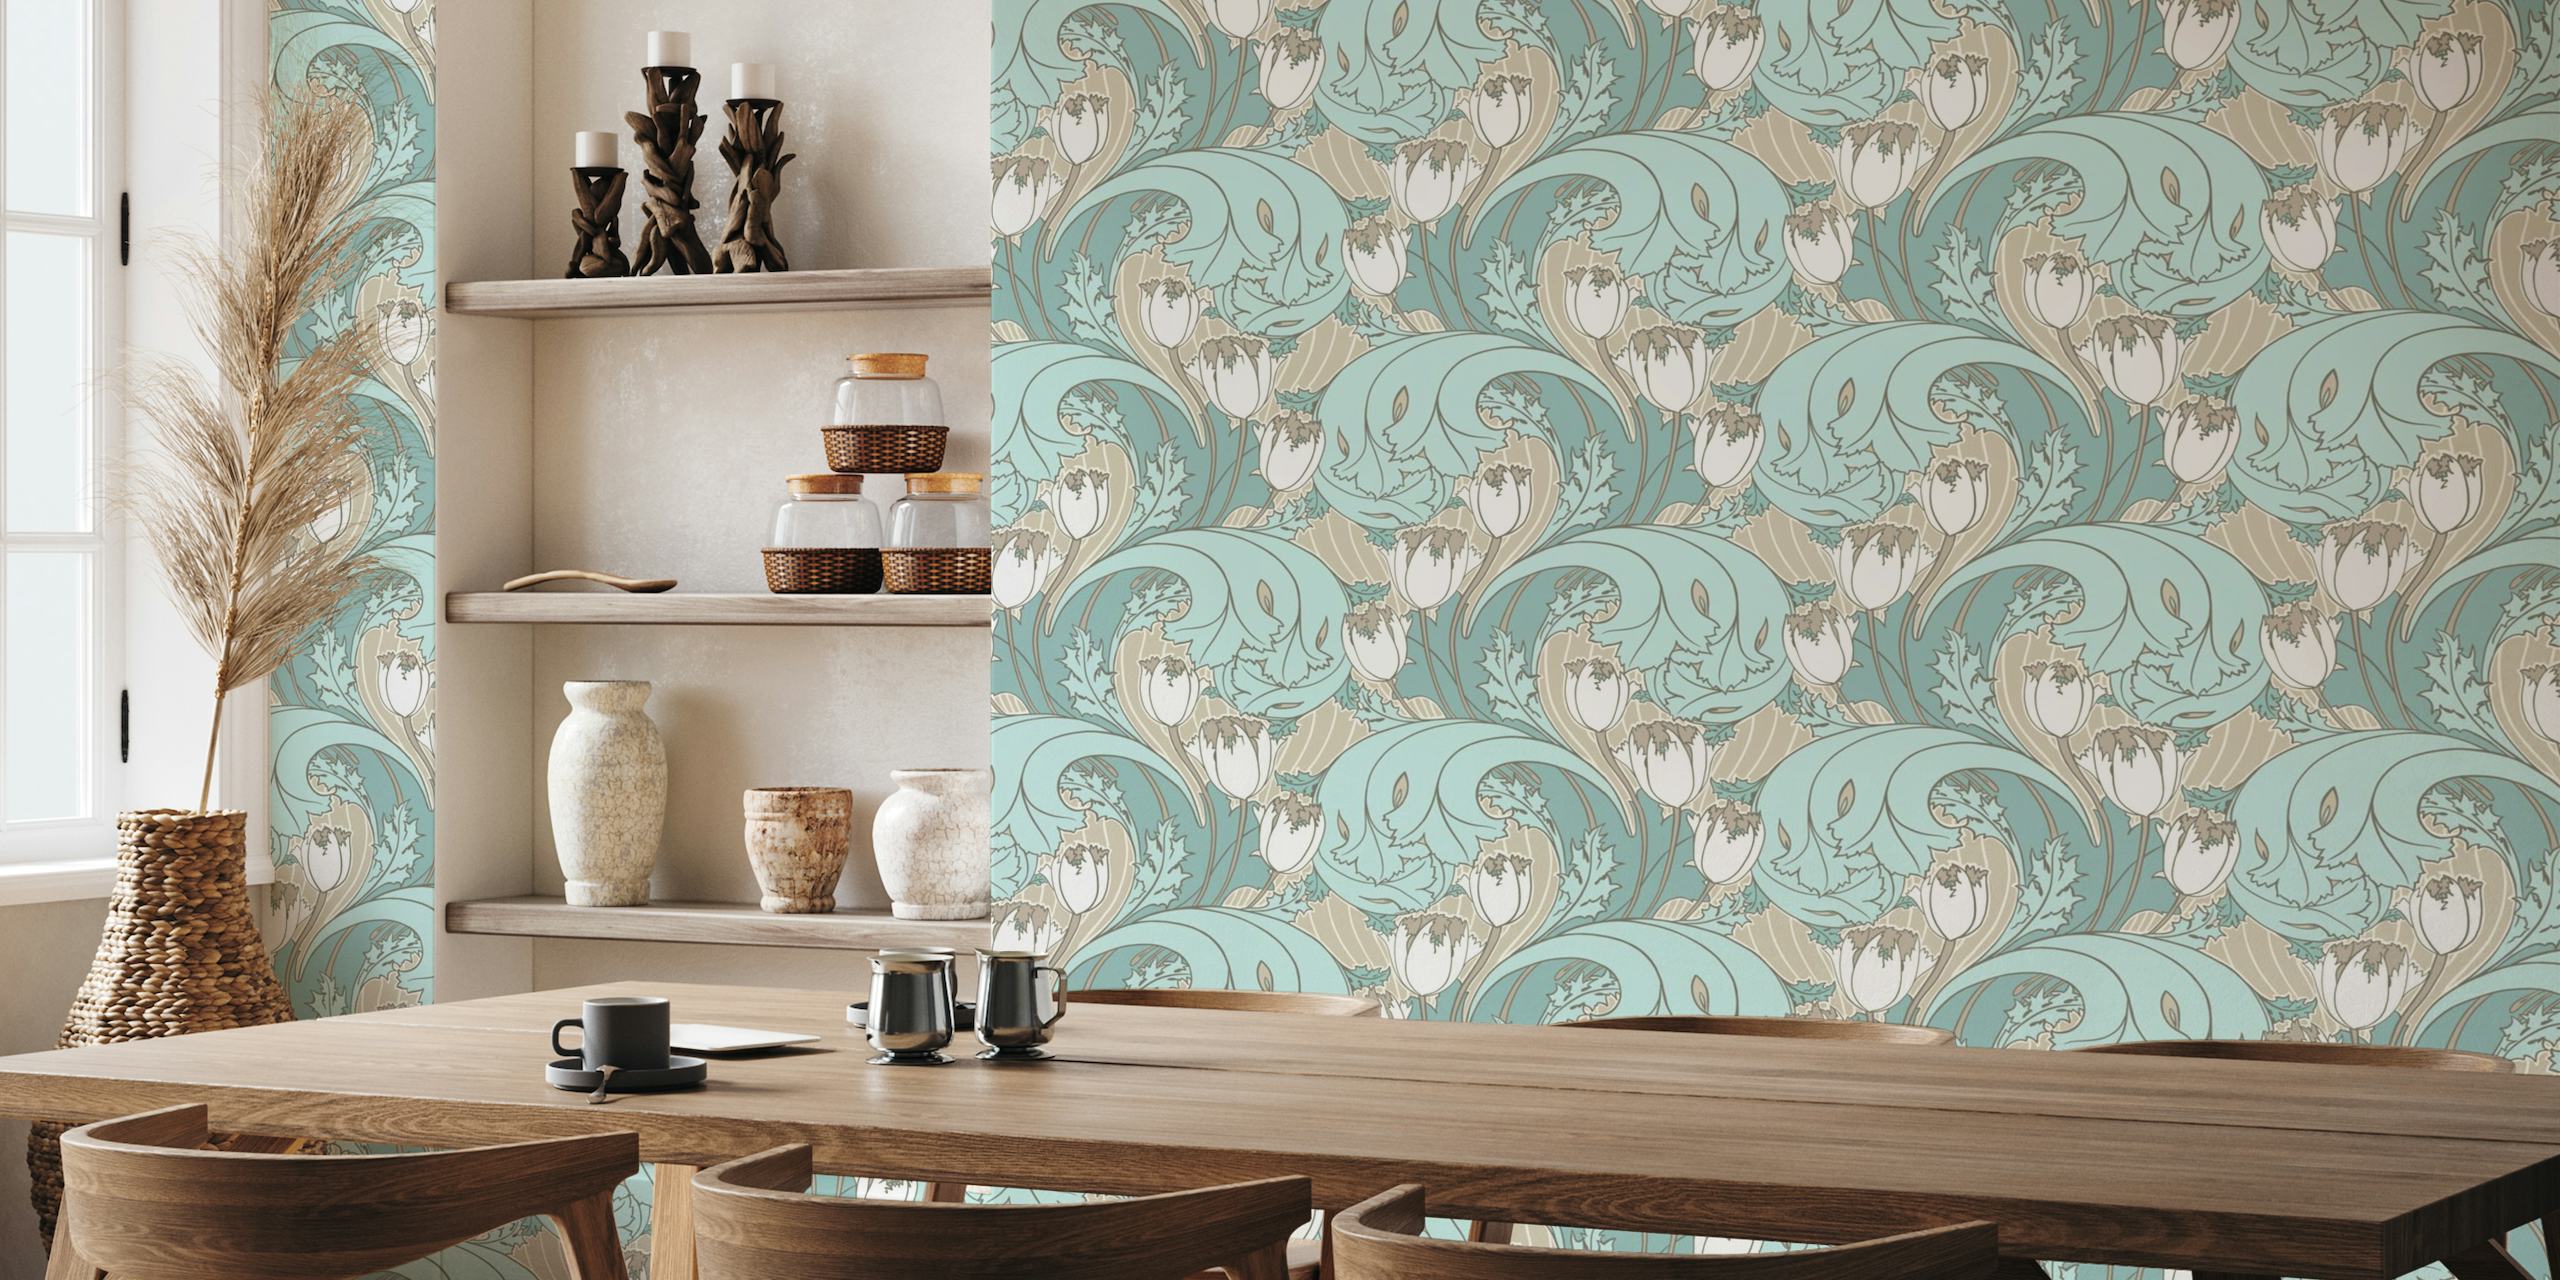 Tulips pattern in duck eggg blue grey white ταπετσαρία